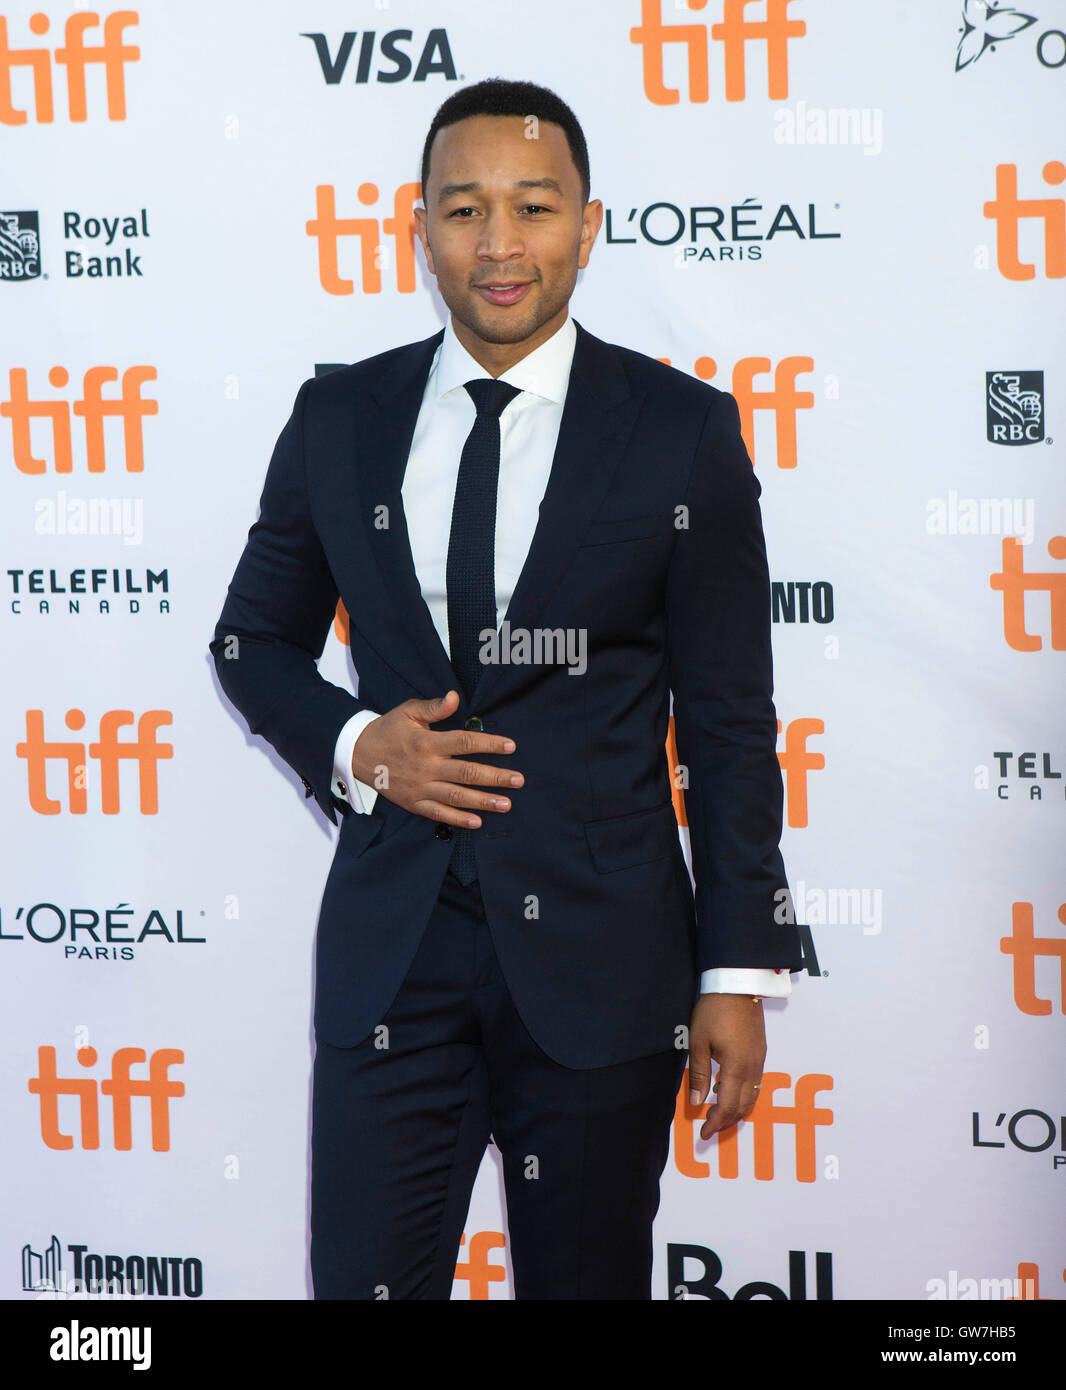 Toronto, Canada. 12th Sep, 2016. Actor John Legend poses for photos before the Canadian premiere of the film 'La La Land' at the Princess of Wales Theater during the 41st Toronto International Film Festival in Toronto, Canada, Sept. 12, 2016. Credit:  Zou Zheng/Xinhua/Alamy Live News Stock Photo